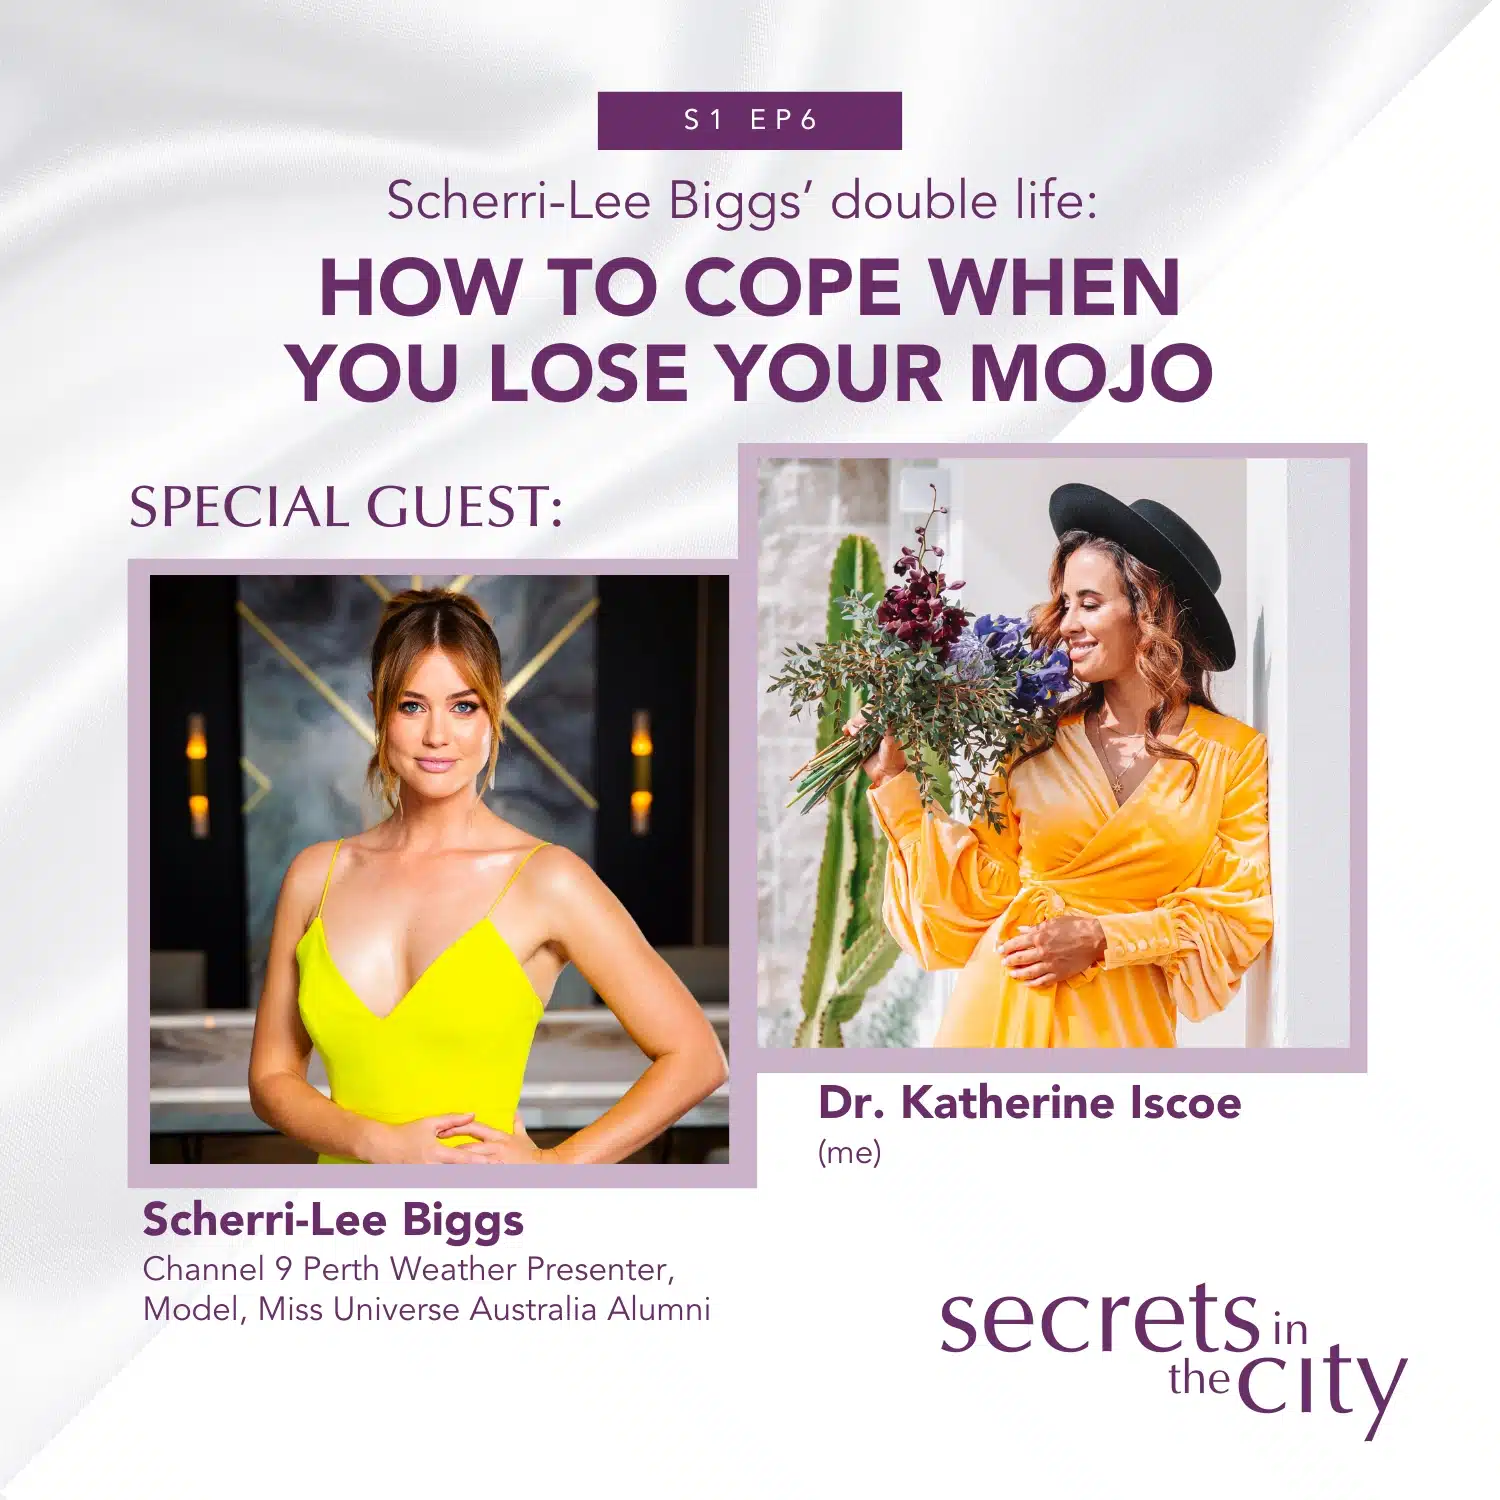 Secrets in the City podcast cover featuring photos of Sherri-Lee Biggs and Dr. Katherine Iscoe